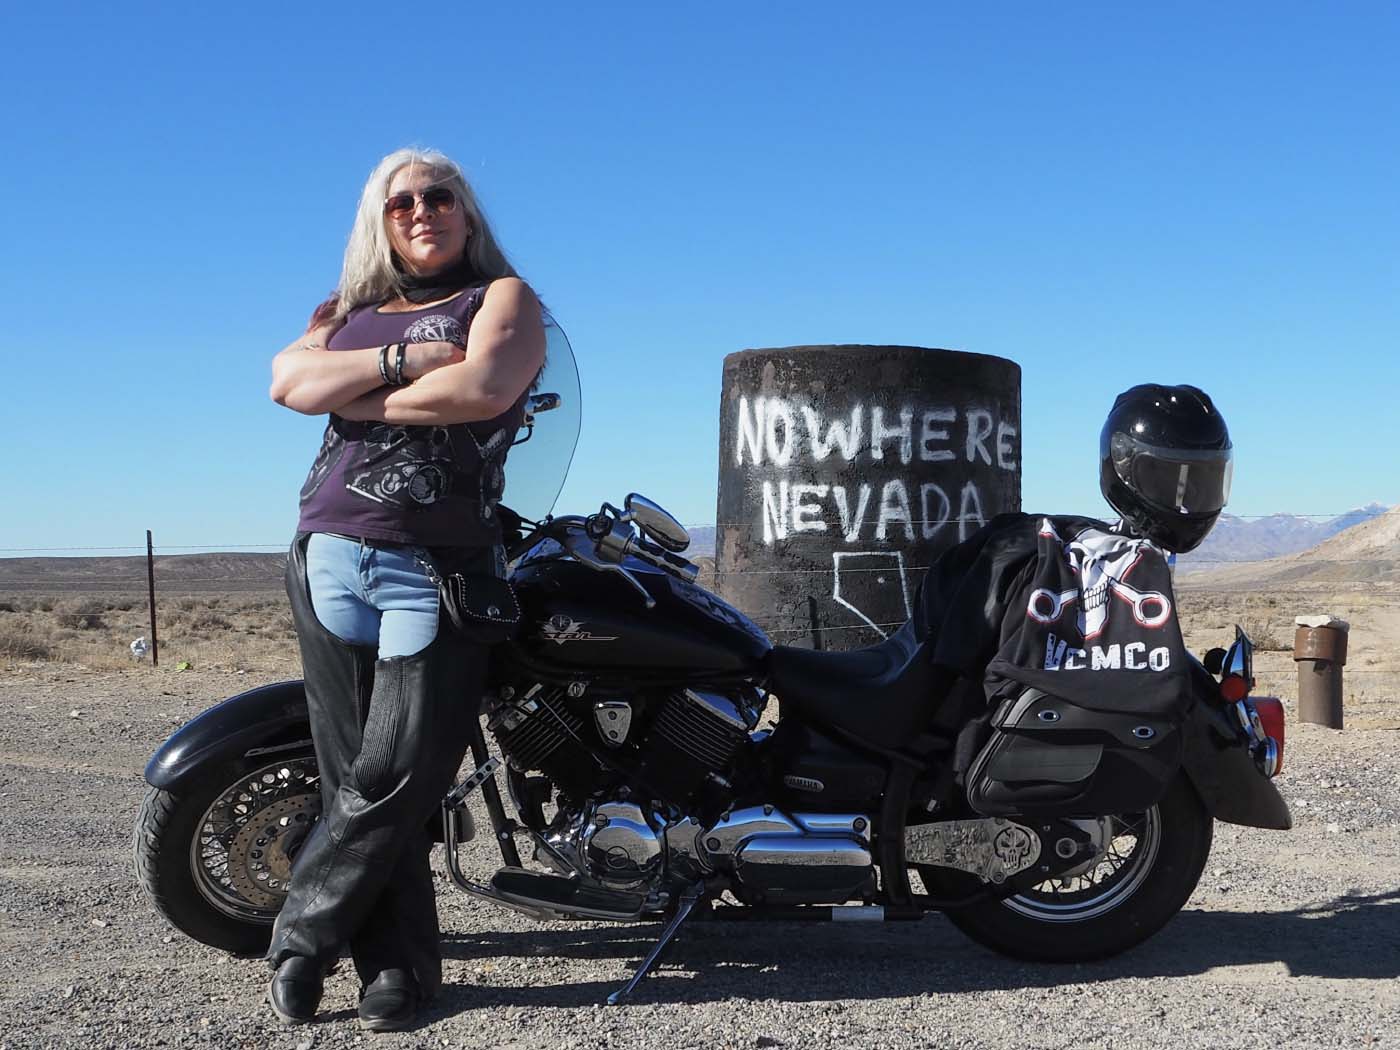 Women with Motorcycle in Nowhere Nevada. Virginia City Motorcycle Company